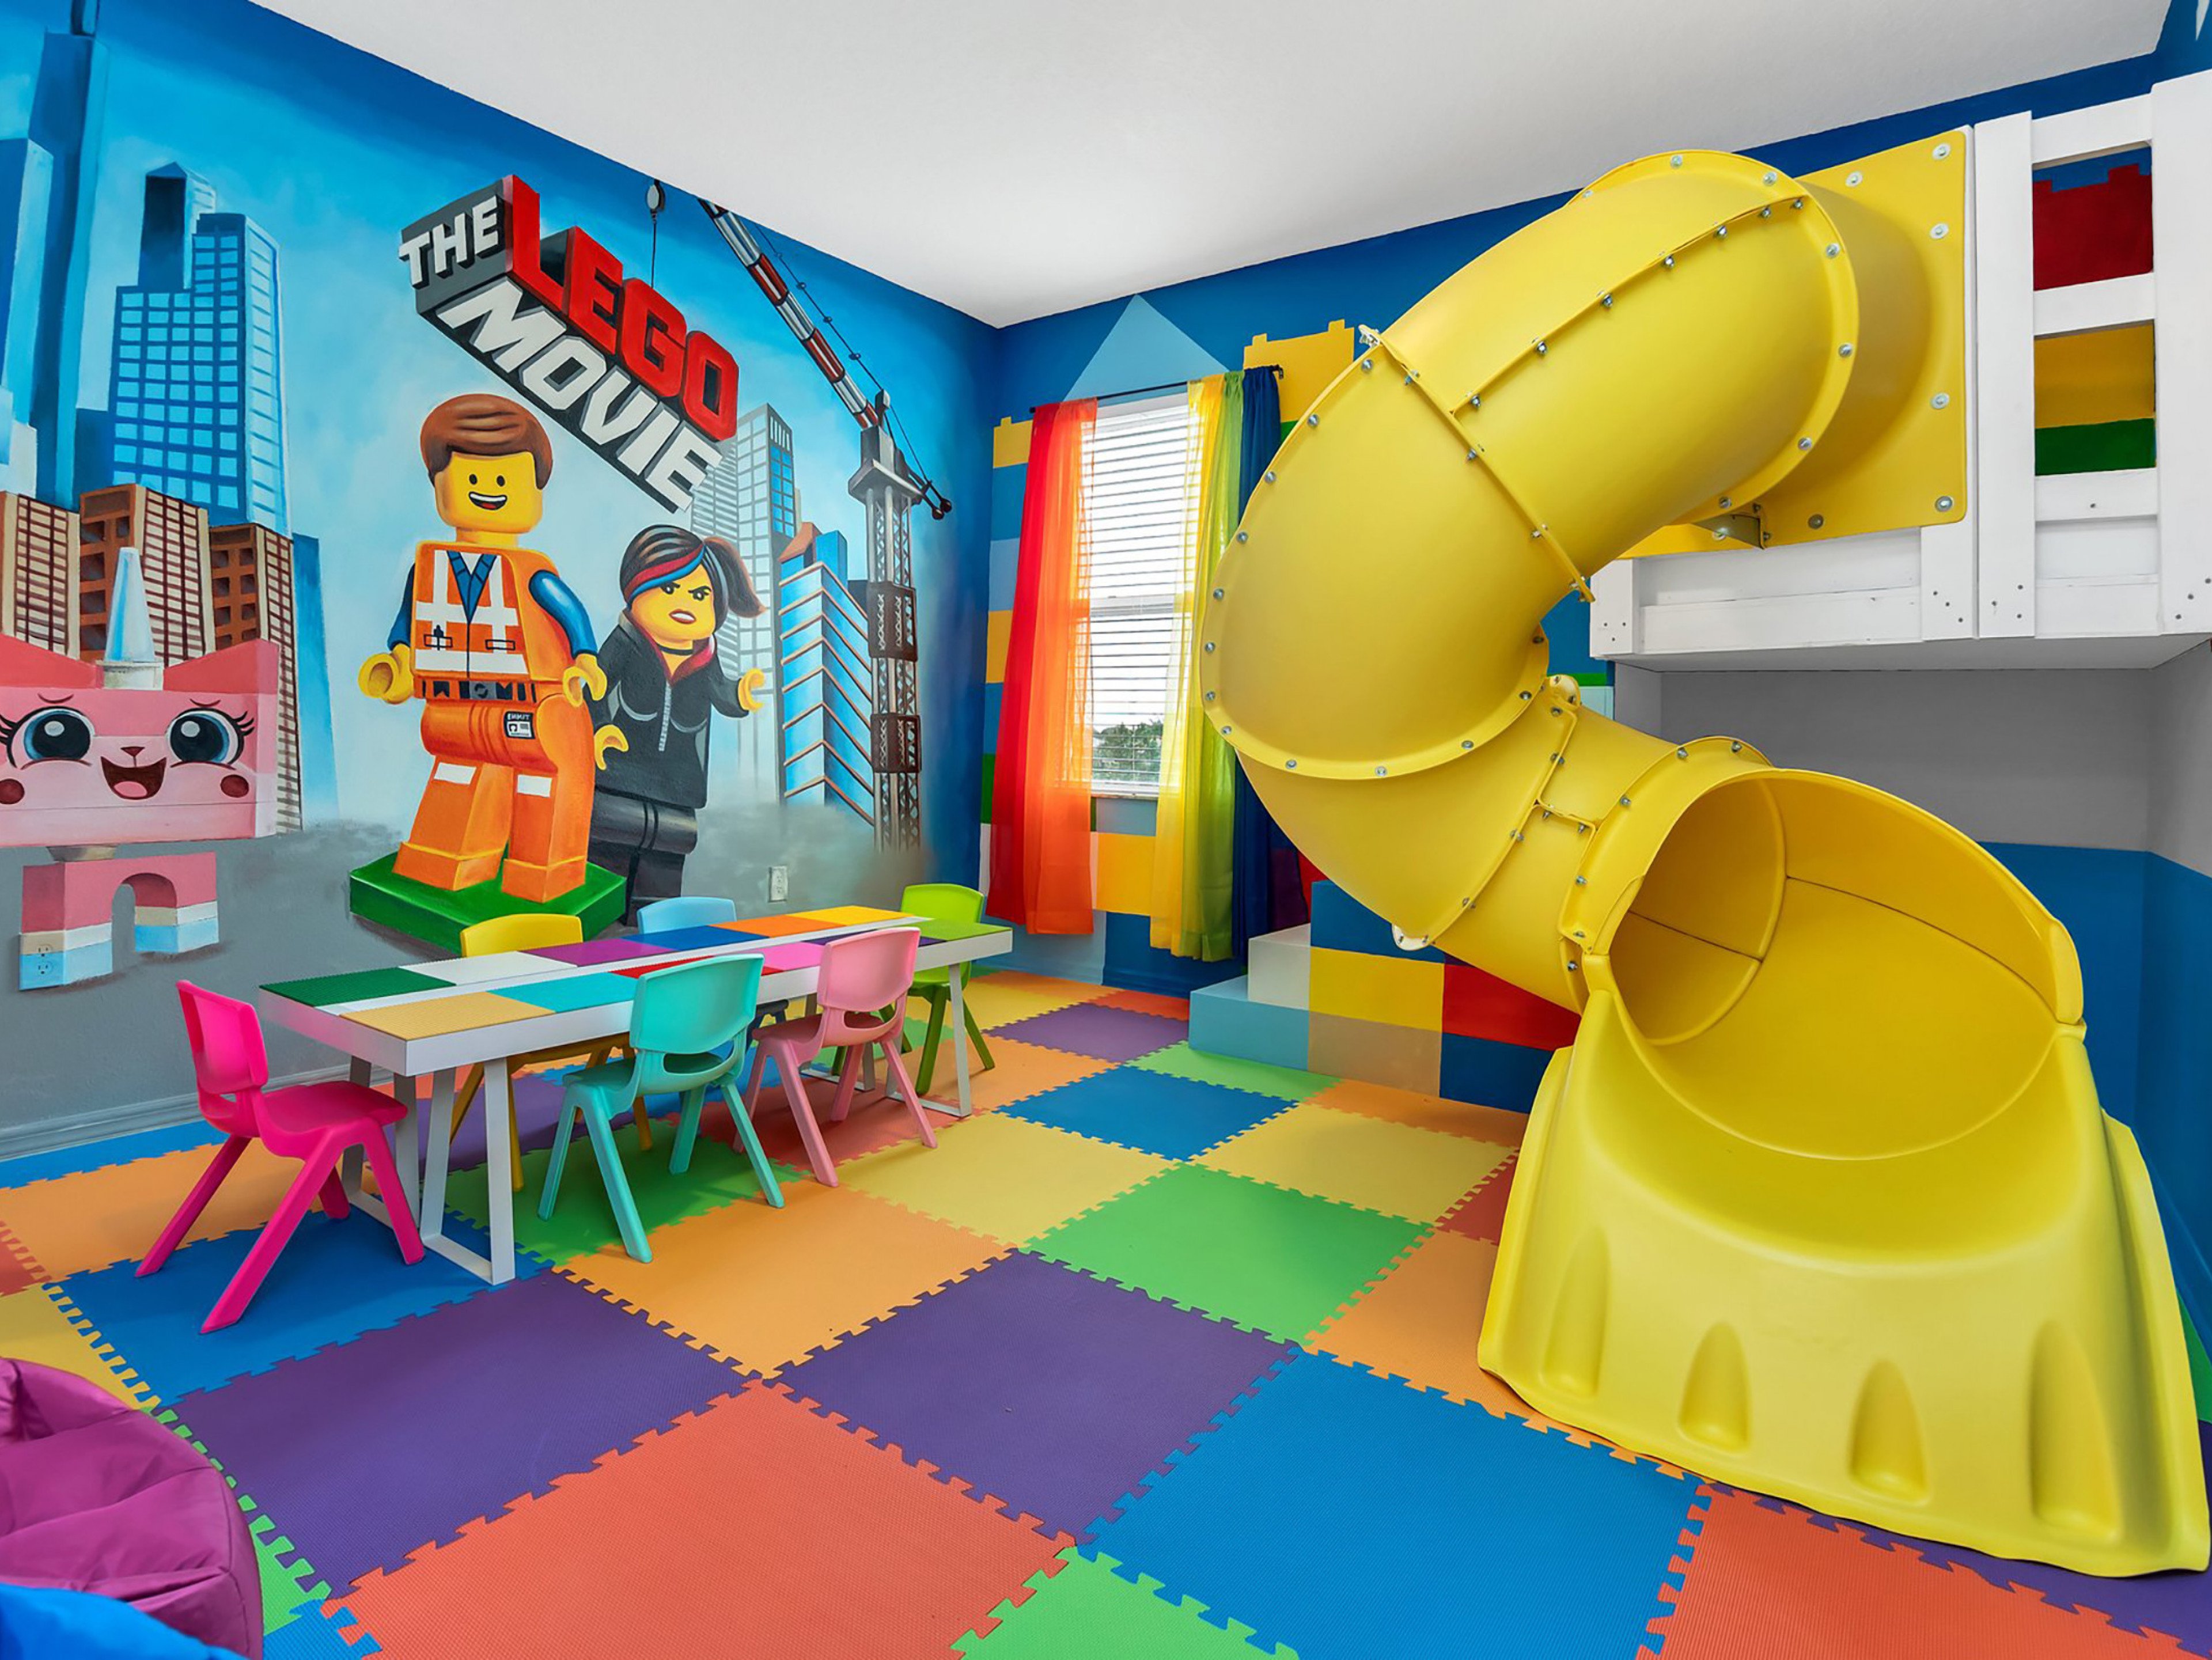  Orlando homes with Legoland-themed rooms - Solterra Resort 786